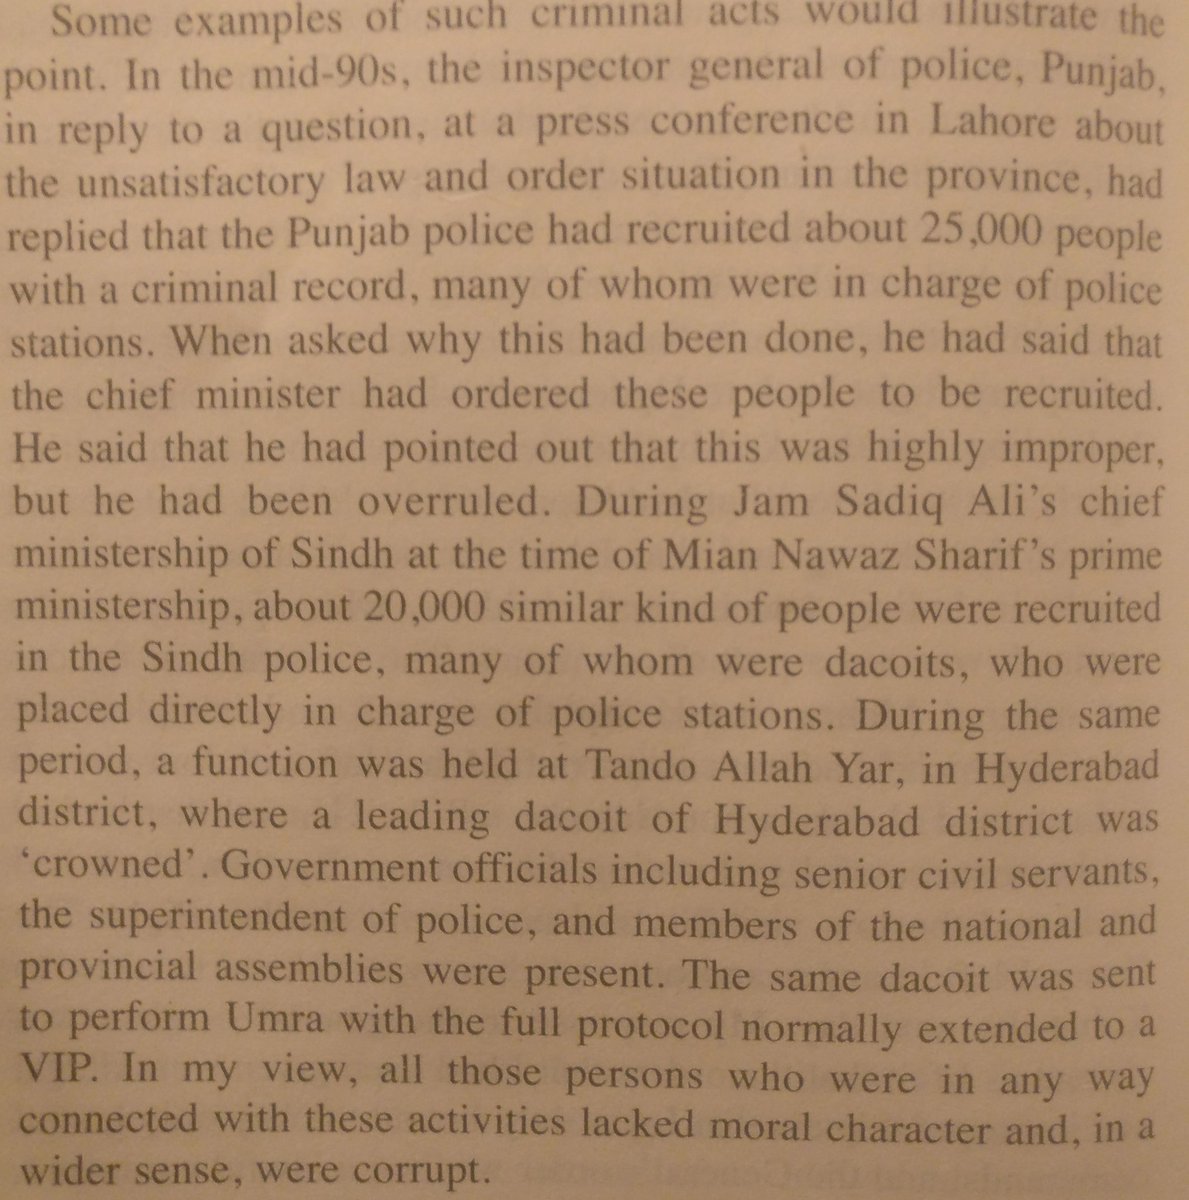 6/NDuring BB tenures, her govts recruted 25 and 20 thousand criminals in Punjab and Sindh police.